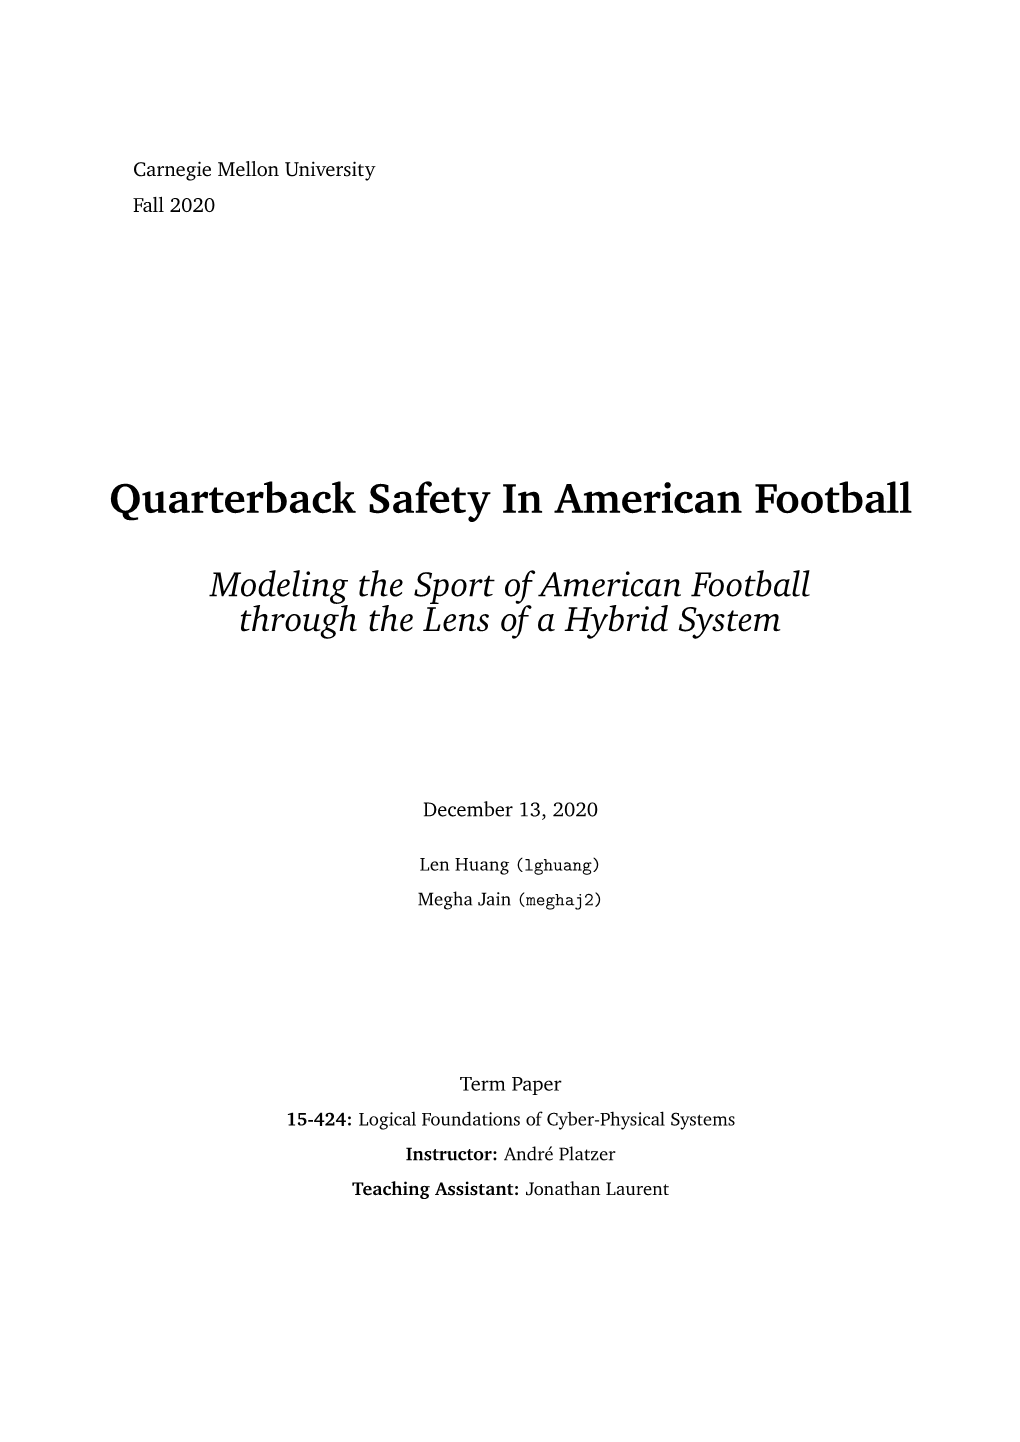 Quarterback Safety in American Football